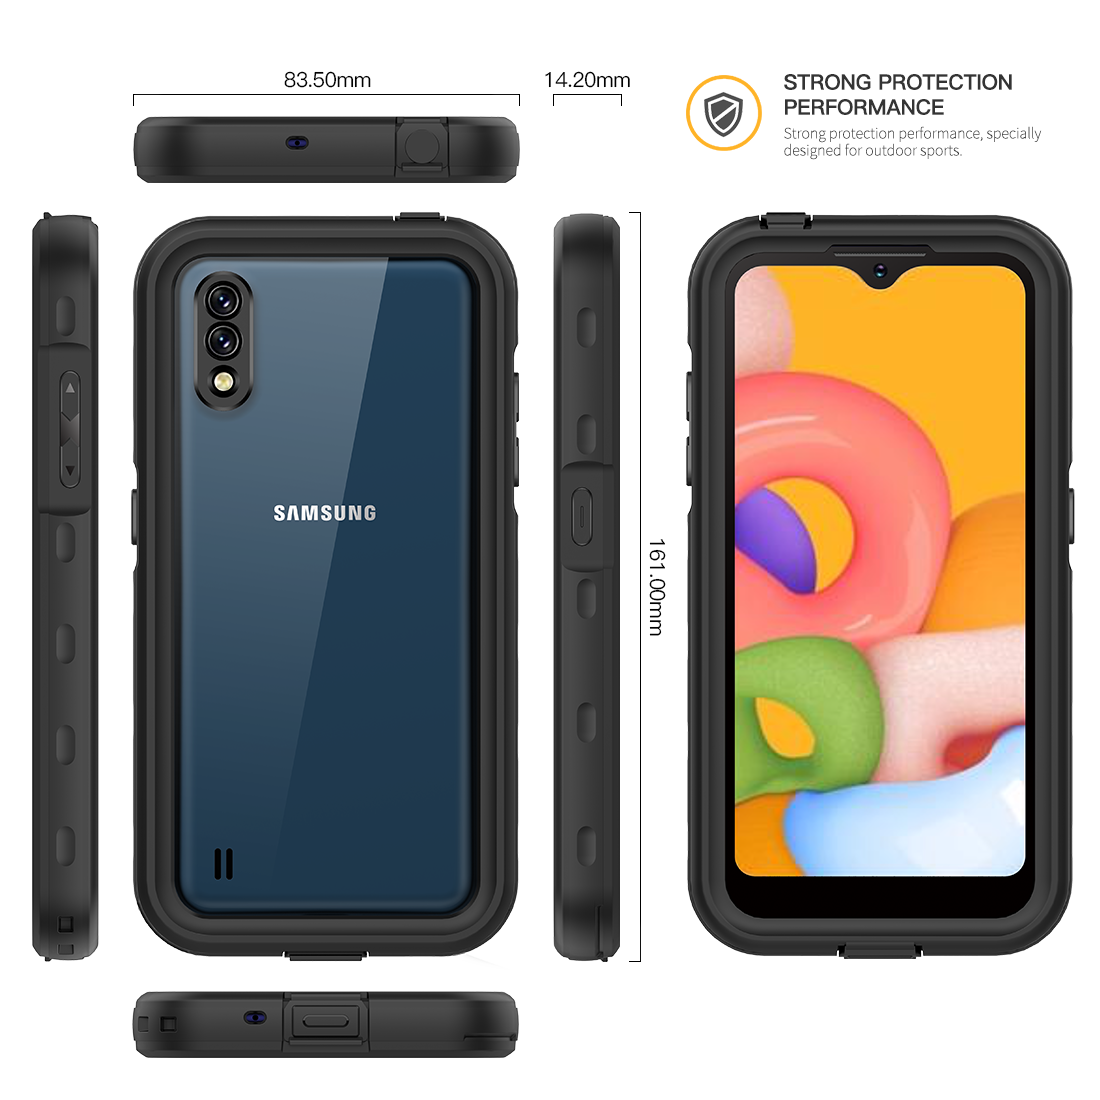 Samsung Galaxy A01 Case Waterproof IP68 Clear Full Protection Built-in Screen Protector